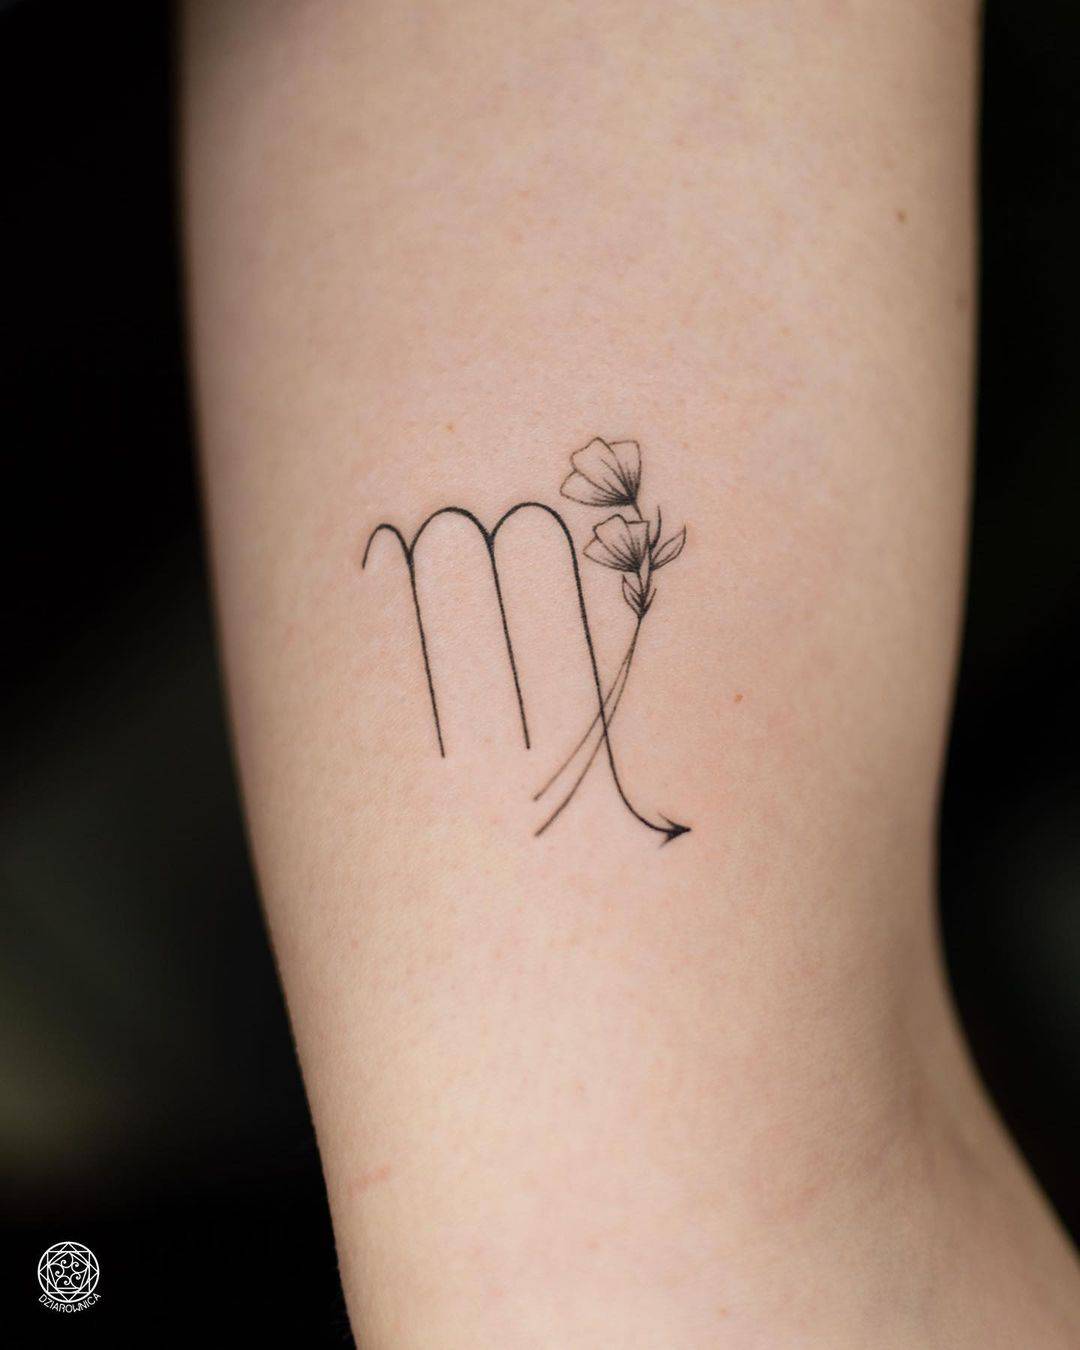 Zodiac sign tattoo | Gallery posted by Kaylee;) | Lemon8